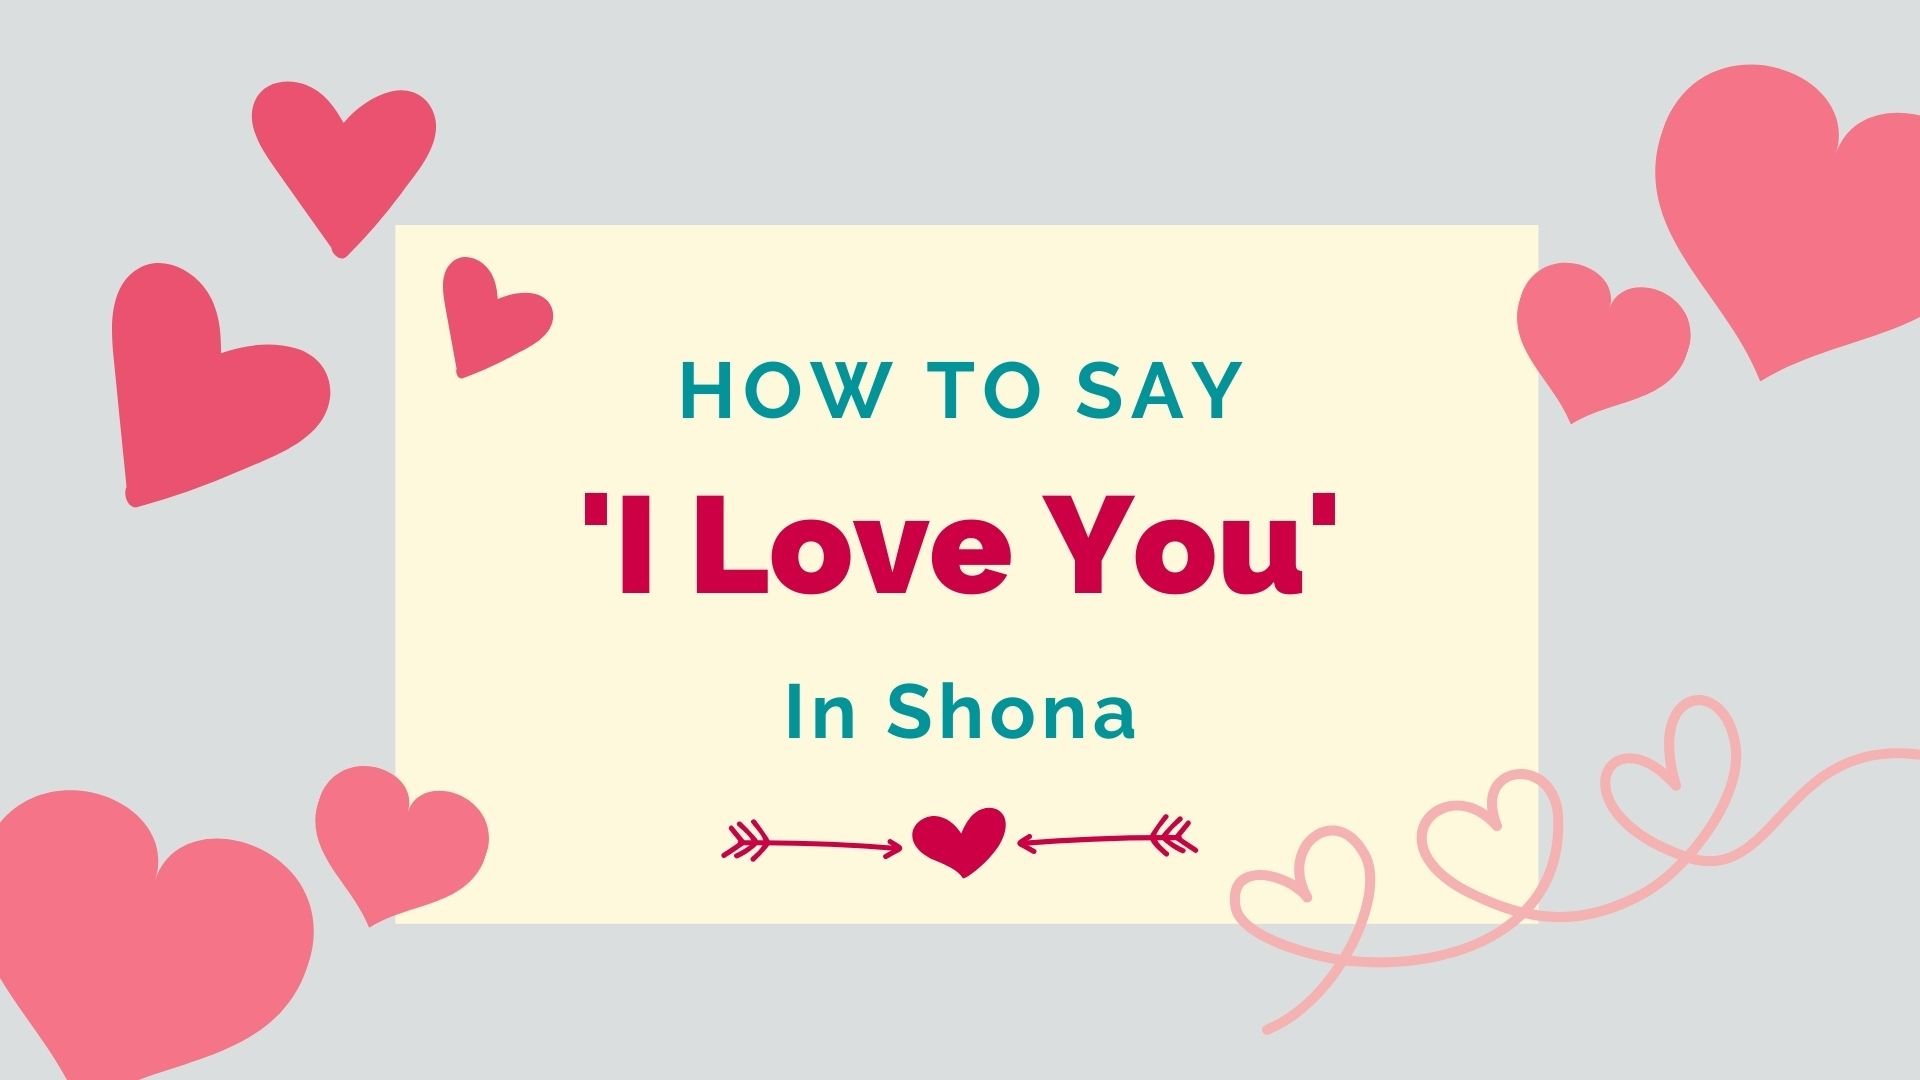 How To Say 'I Love You' In Shona + Other Romantic Phrases - Lingalot